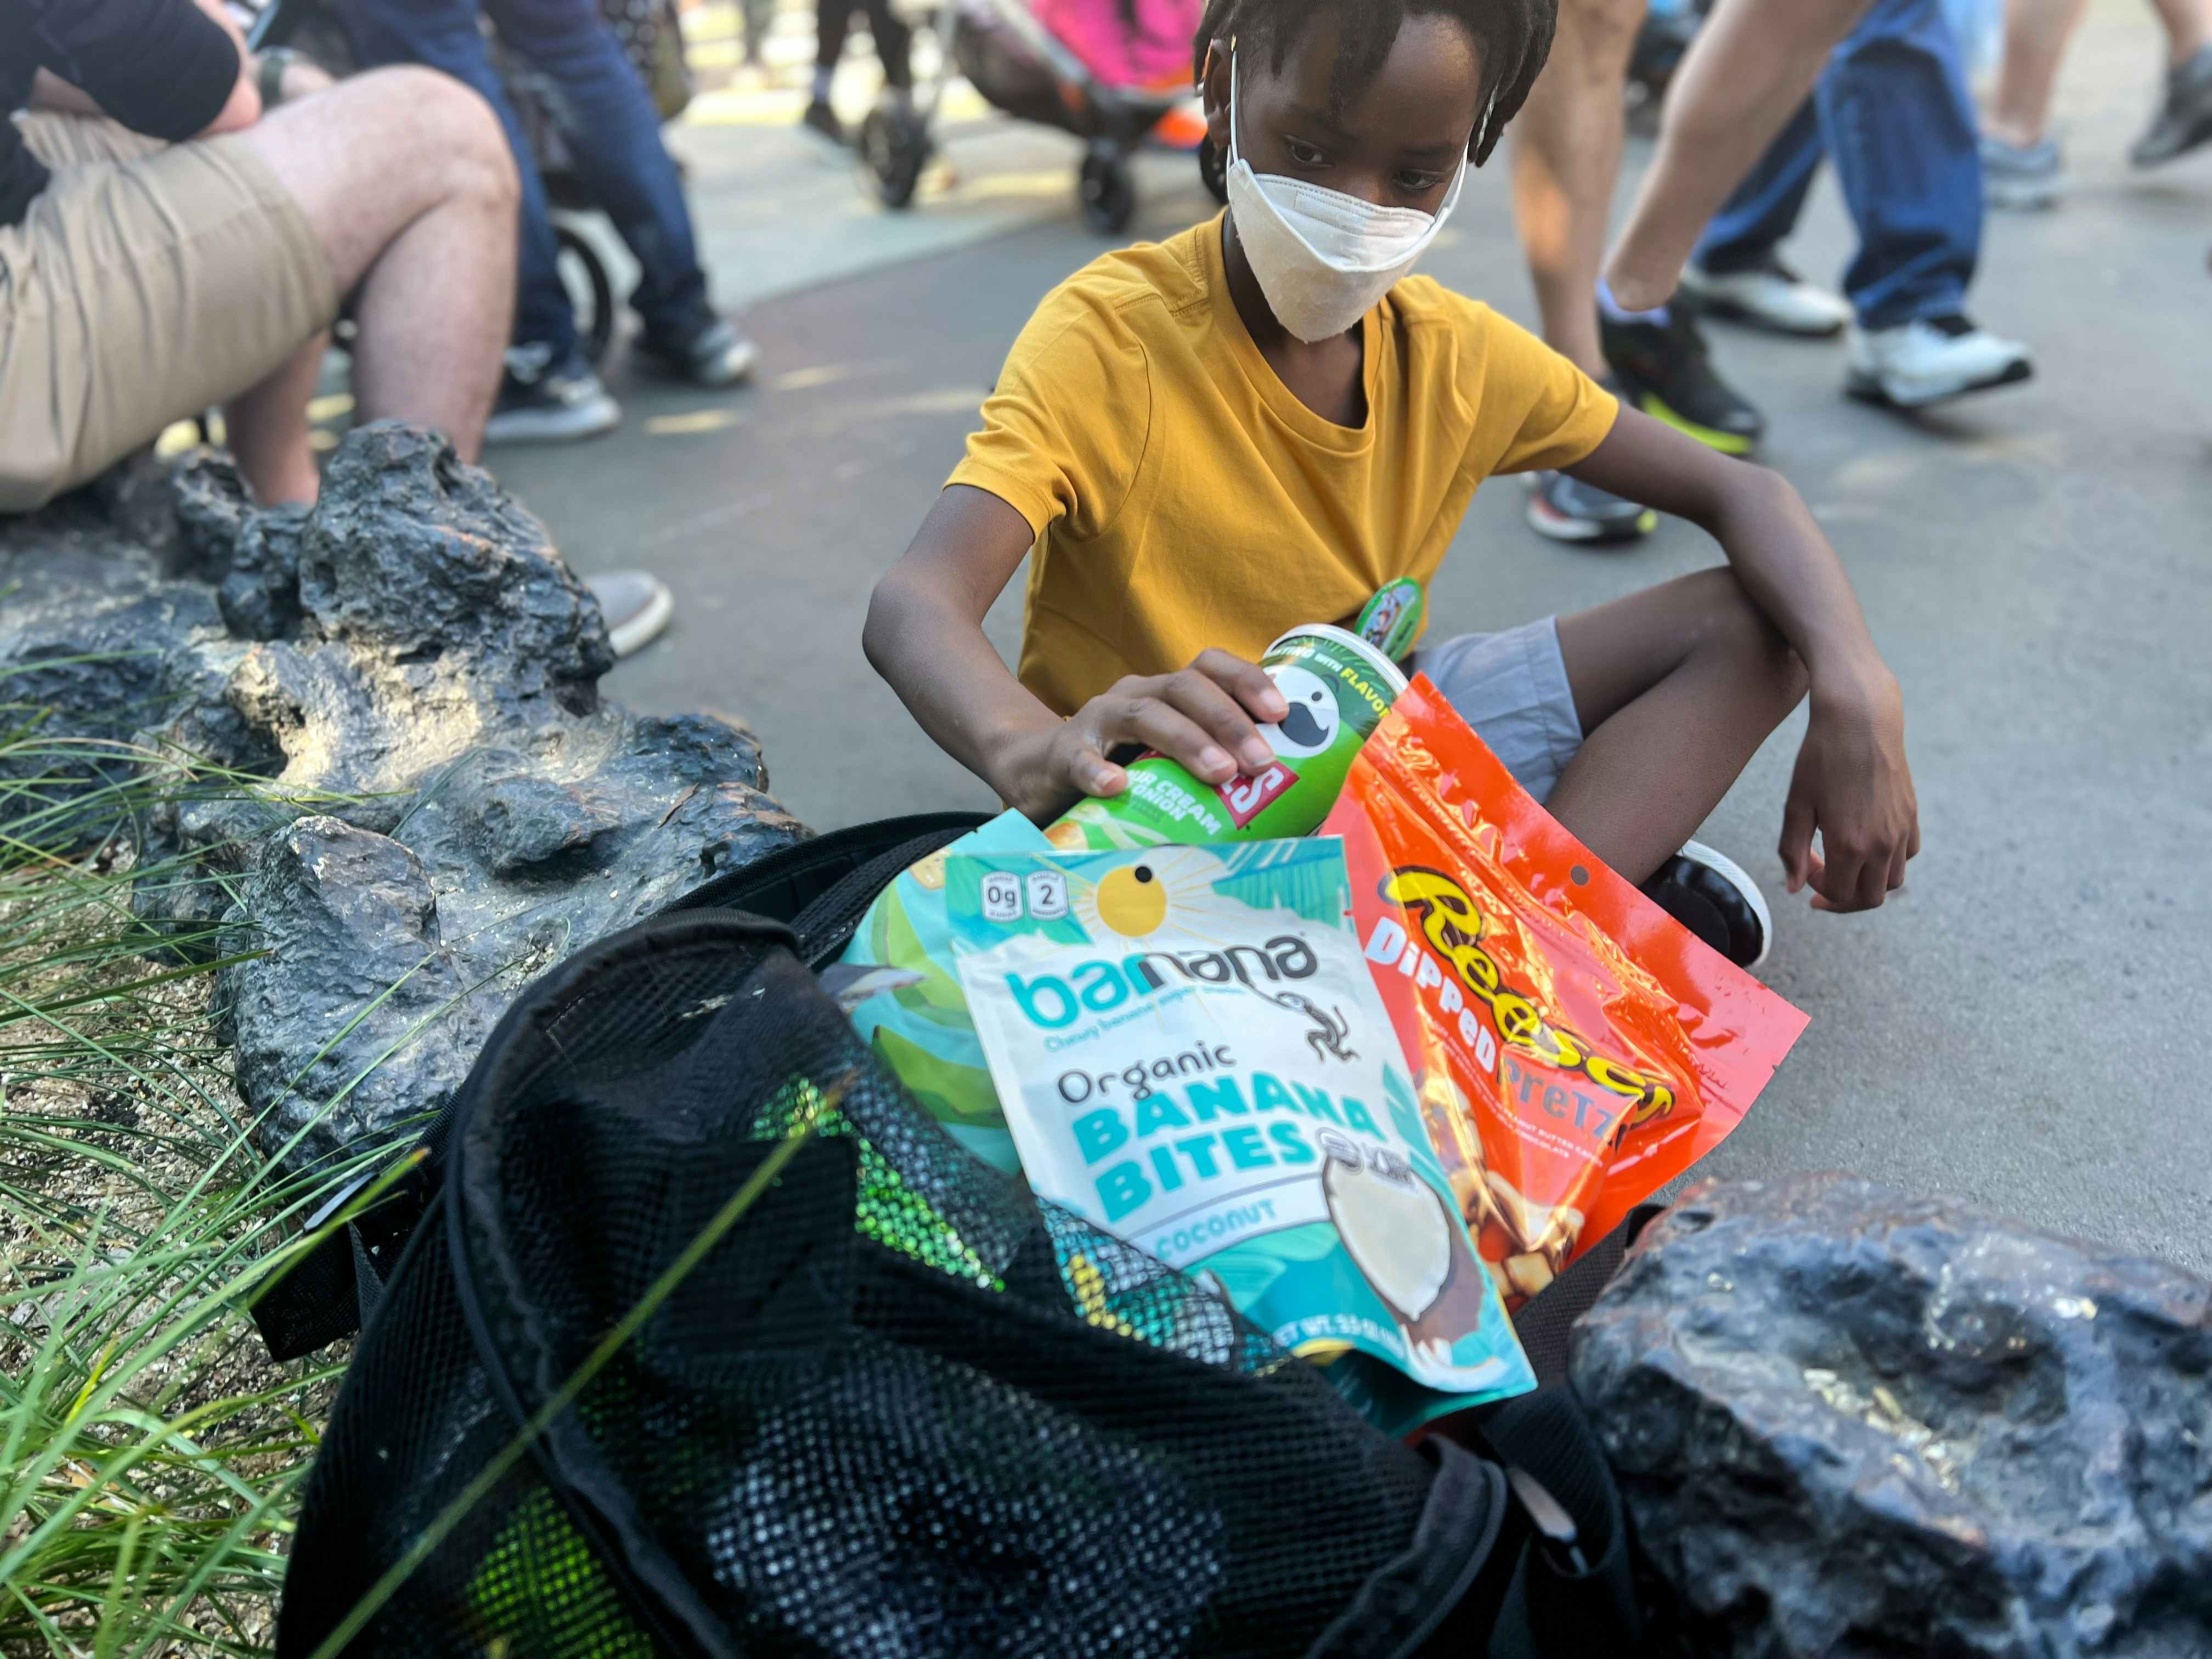 A child taking a can of Pringles out of a bag full of snacks.